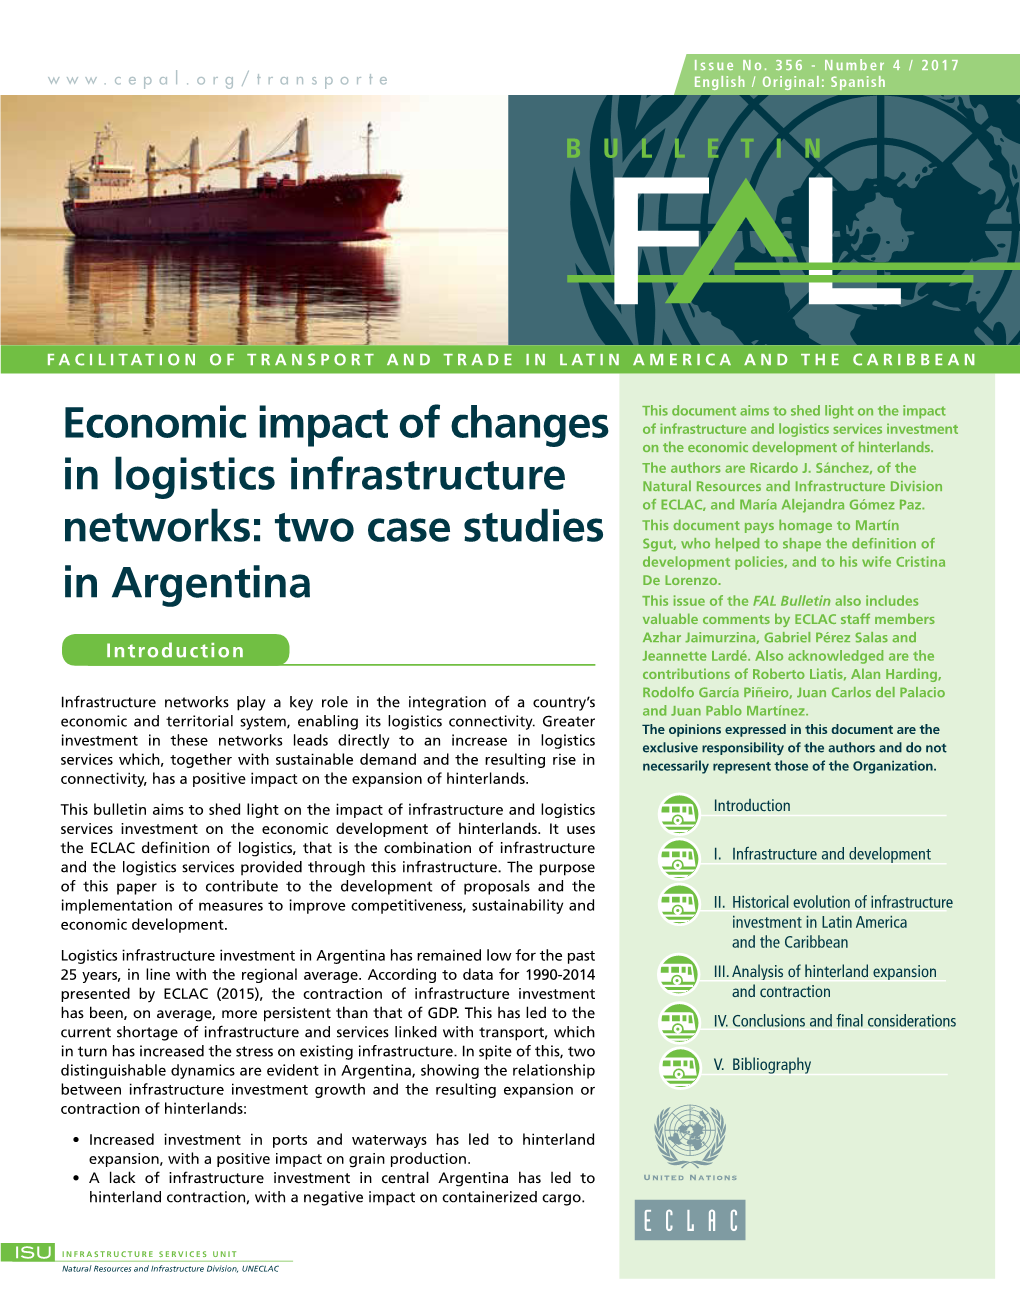 Economic Impact of Changes in Logistics Infrastructure Networks